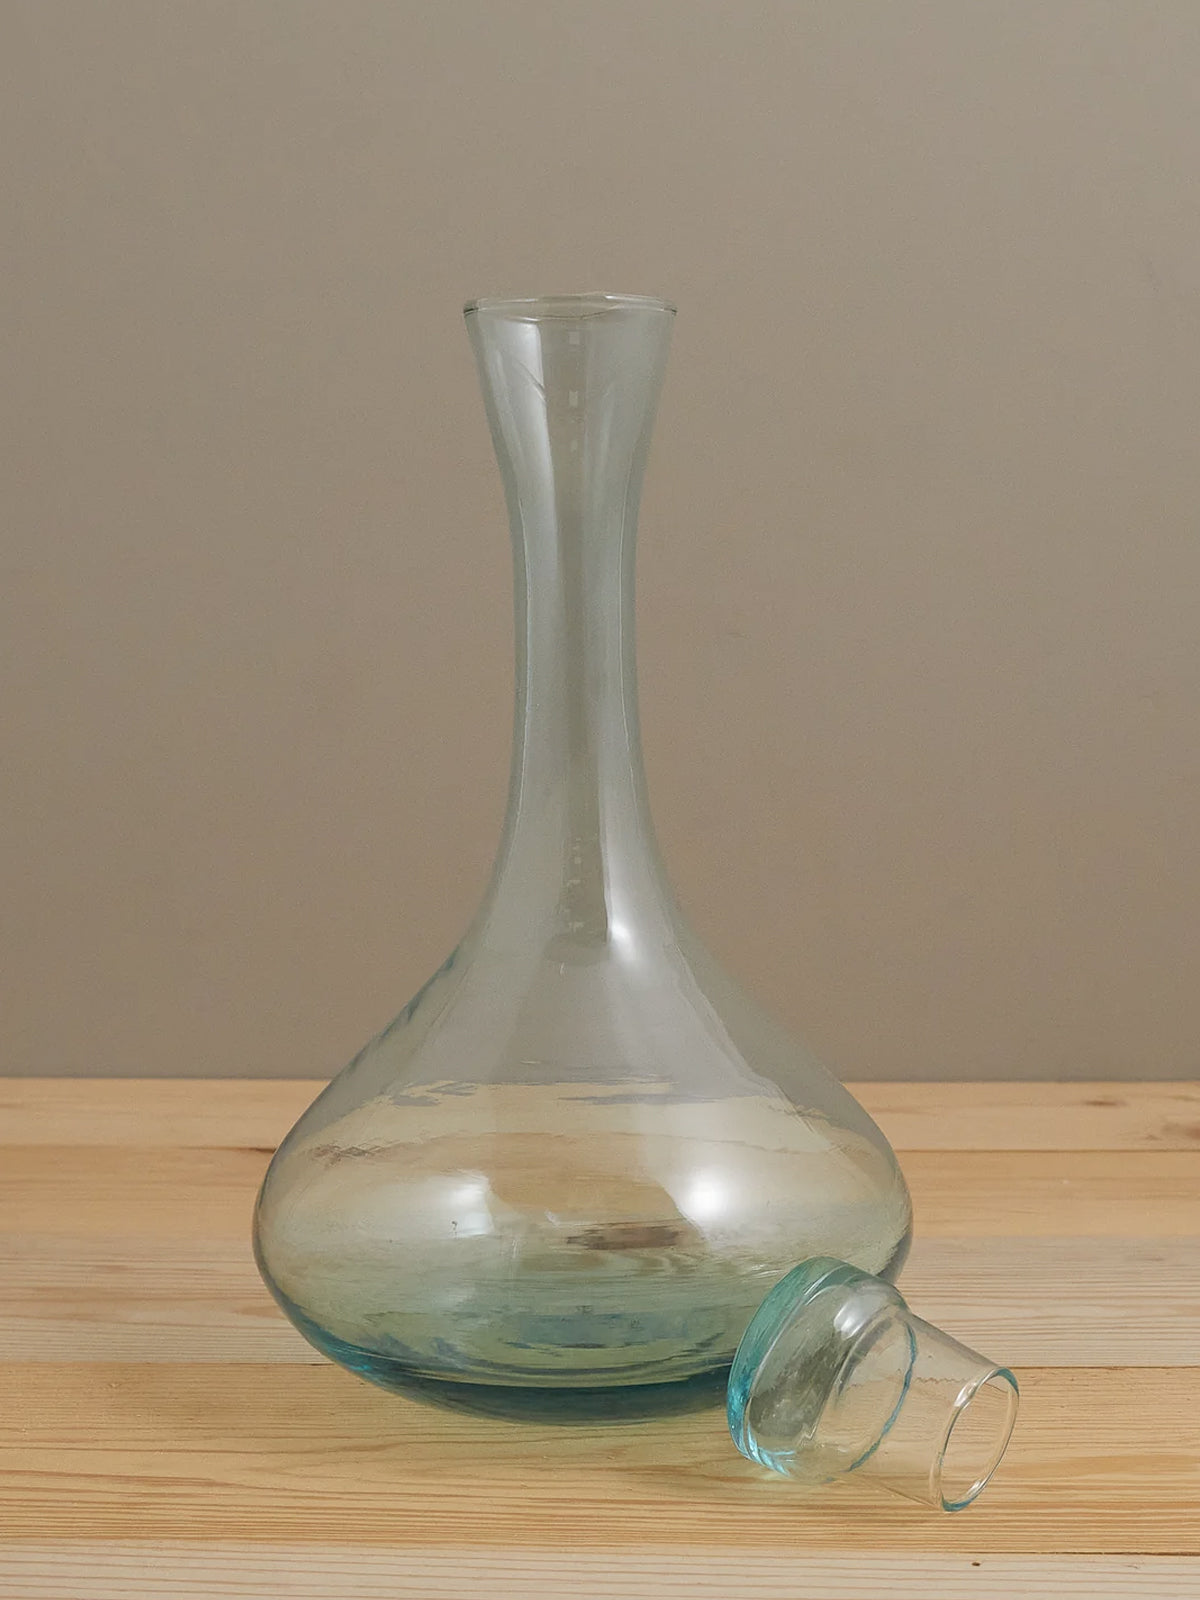 Recycled Glass Decanter with Lid